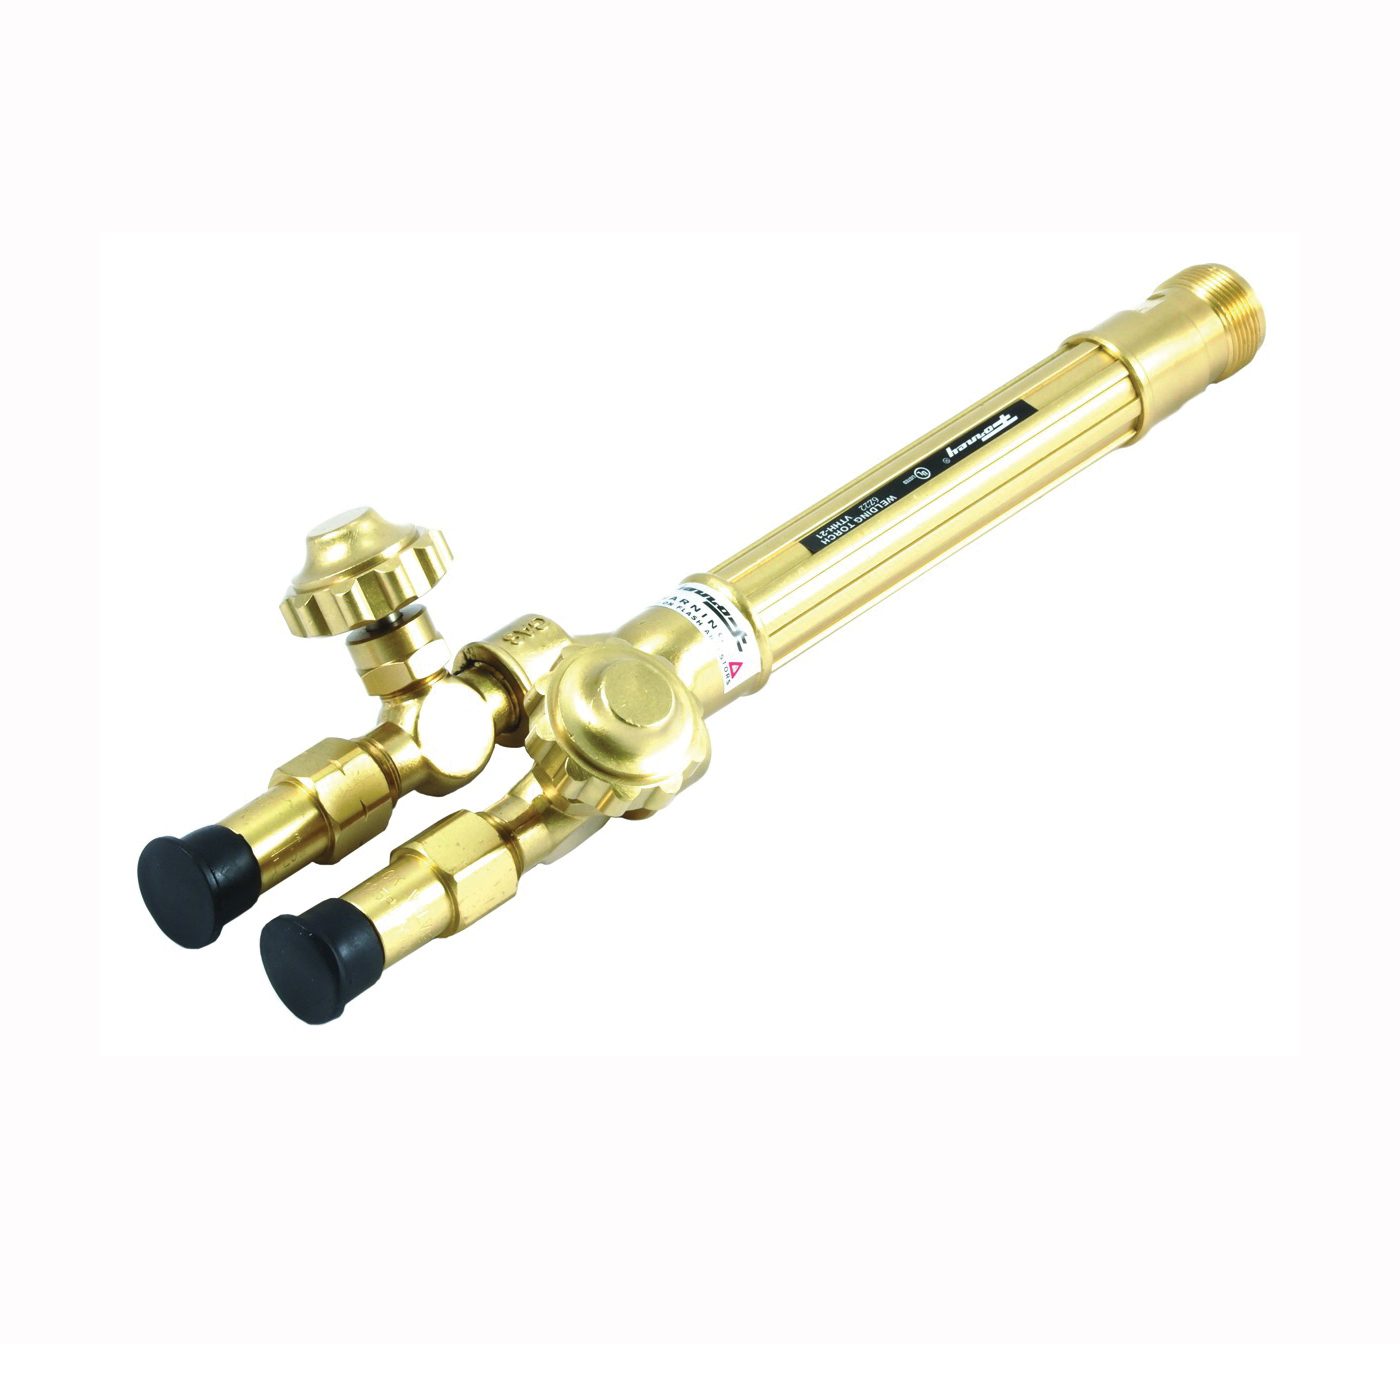 87102 Torch Handle, Compatible, Heavy Duty, Oxy-Acetylene, Tough Extruded Brass, For: Forney 01711 Torch Kit